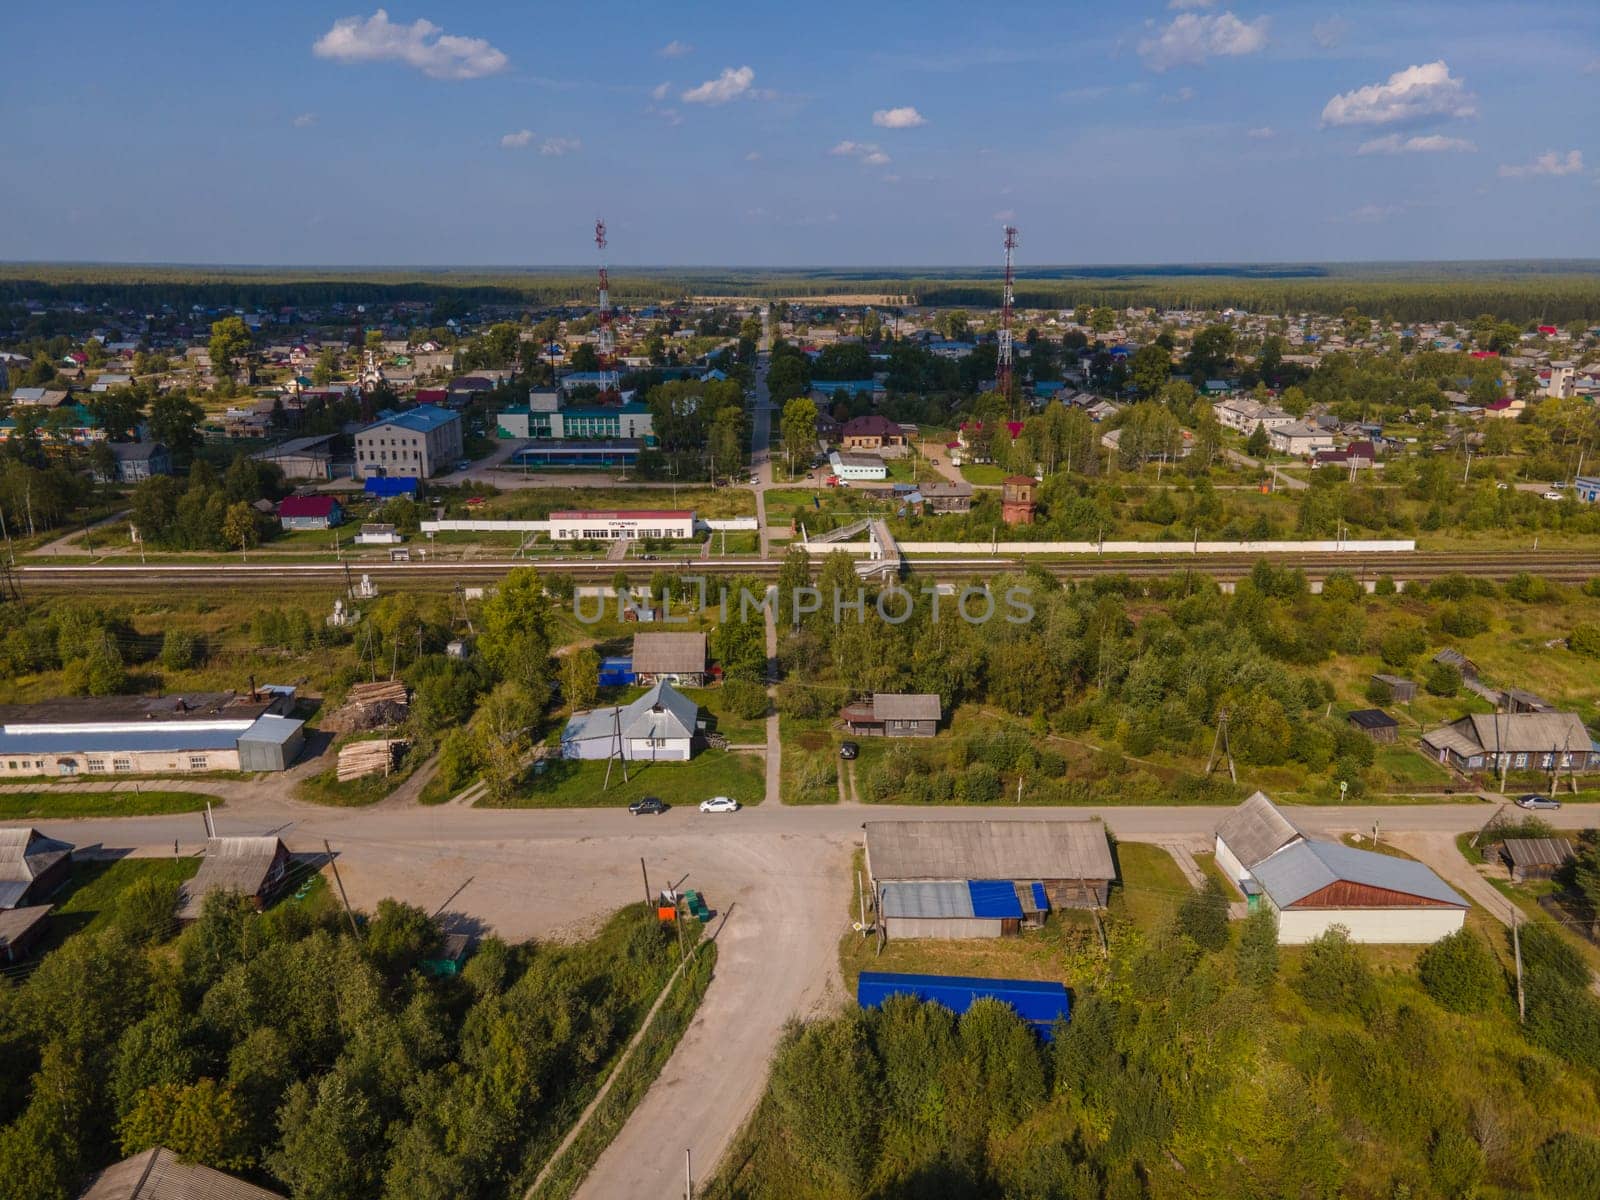 Drone view of roadway between trees and dwelling buildings under cloudy blue sky in region of Kirov Russia